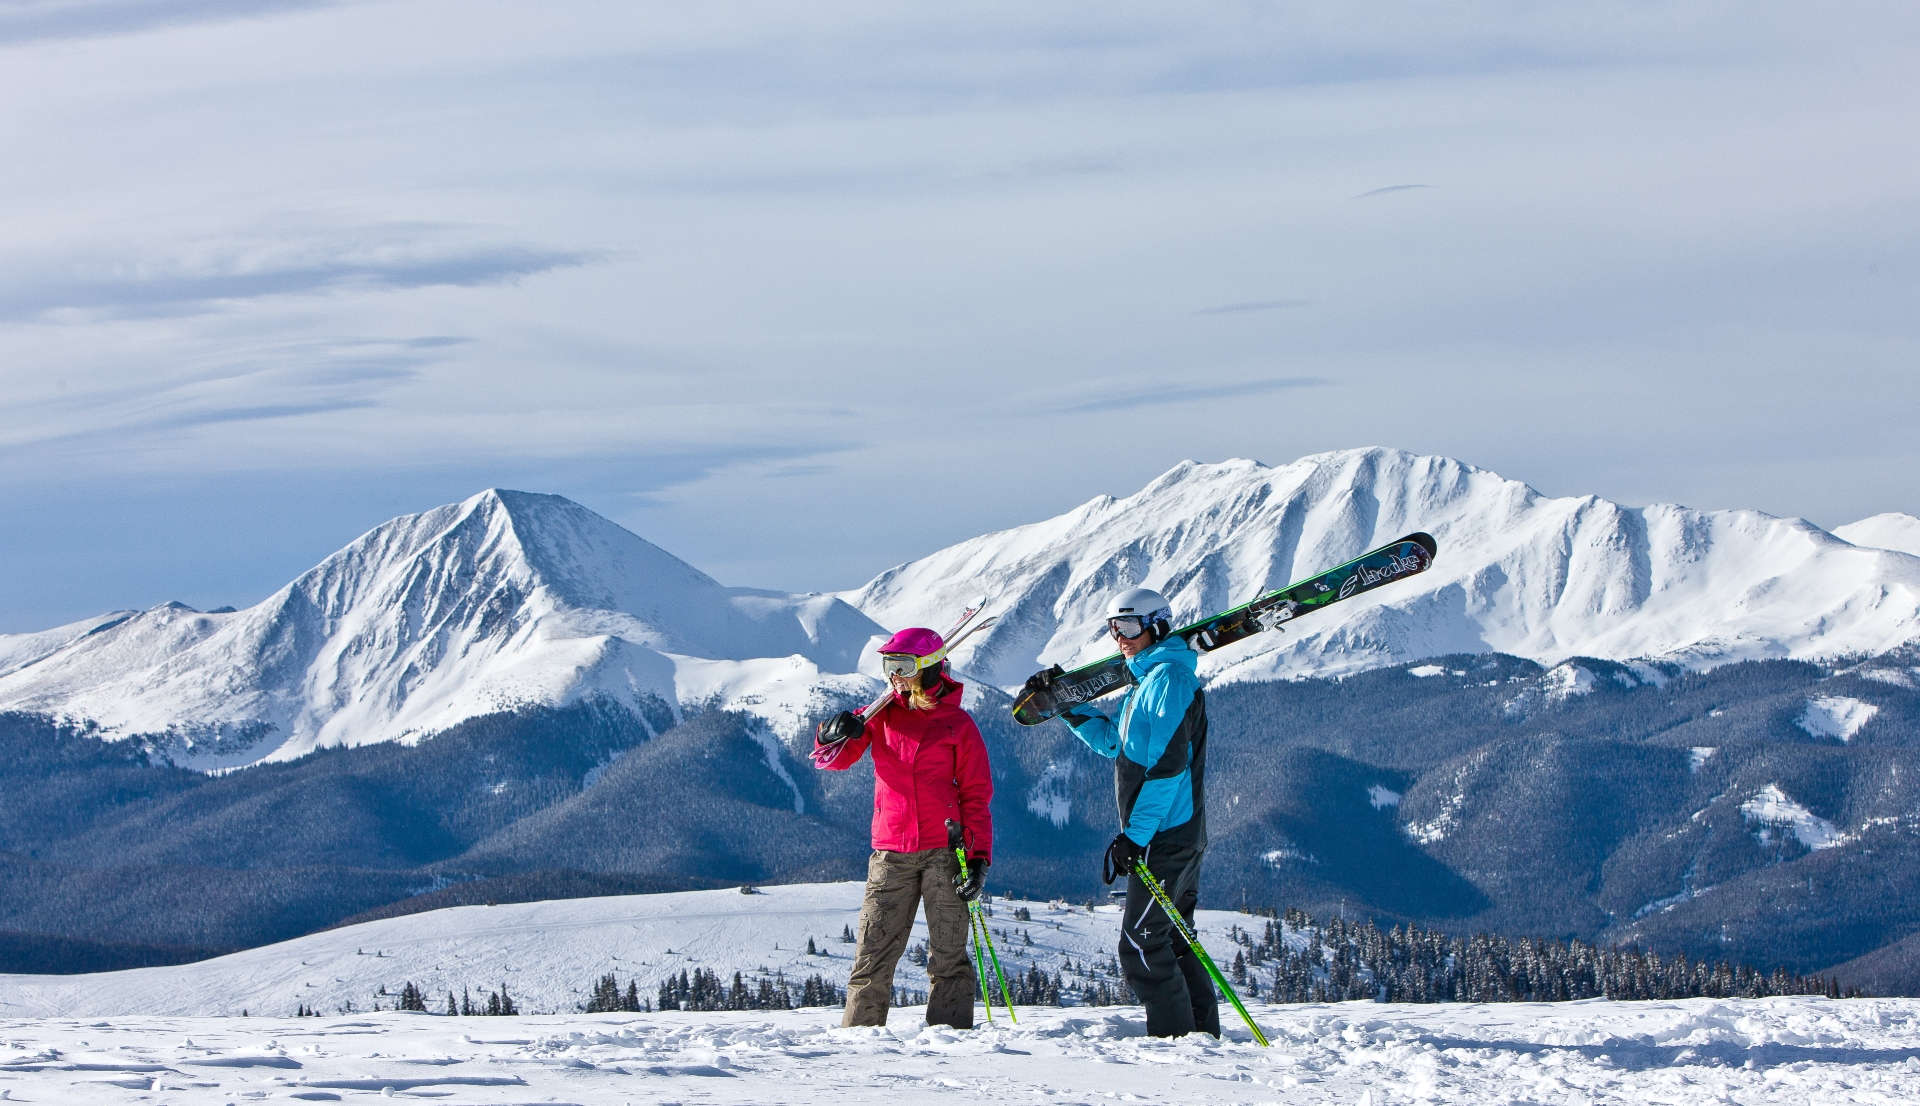 keystone-ski-packages-lowest-prices-best-ski-deals-guaranteed